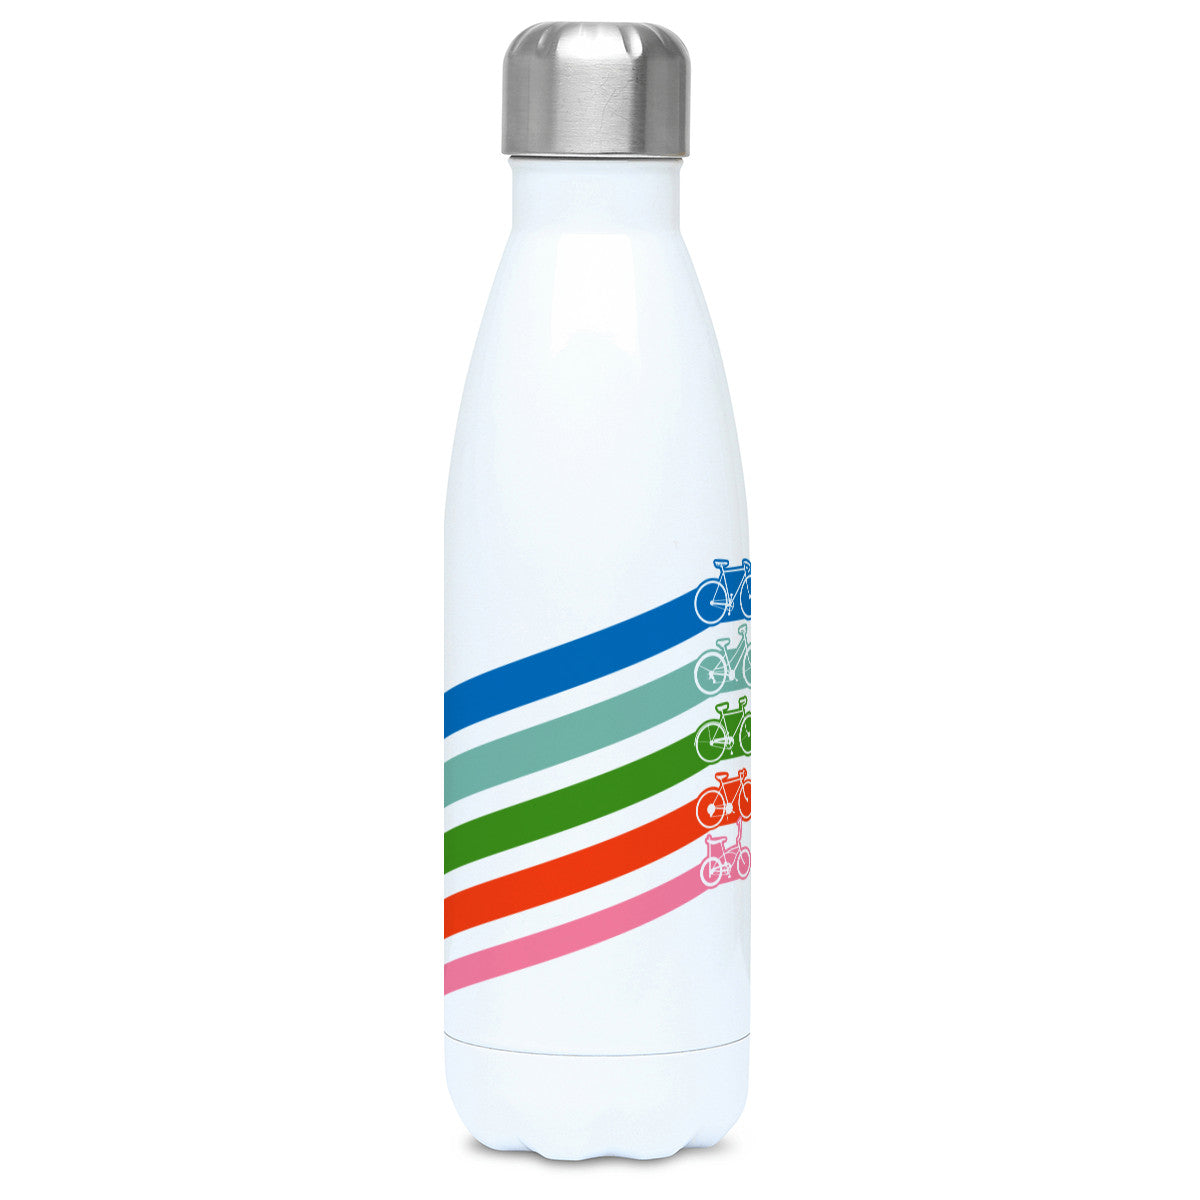 Five retro coloured diagonal stripes leading to different styles of bikes on a white metal insulated drinks bottle, lid on